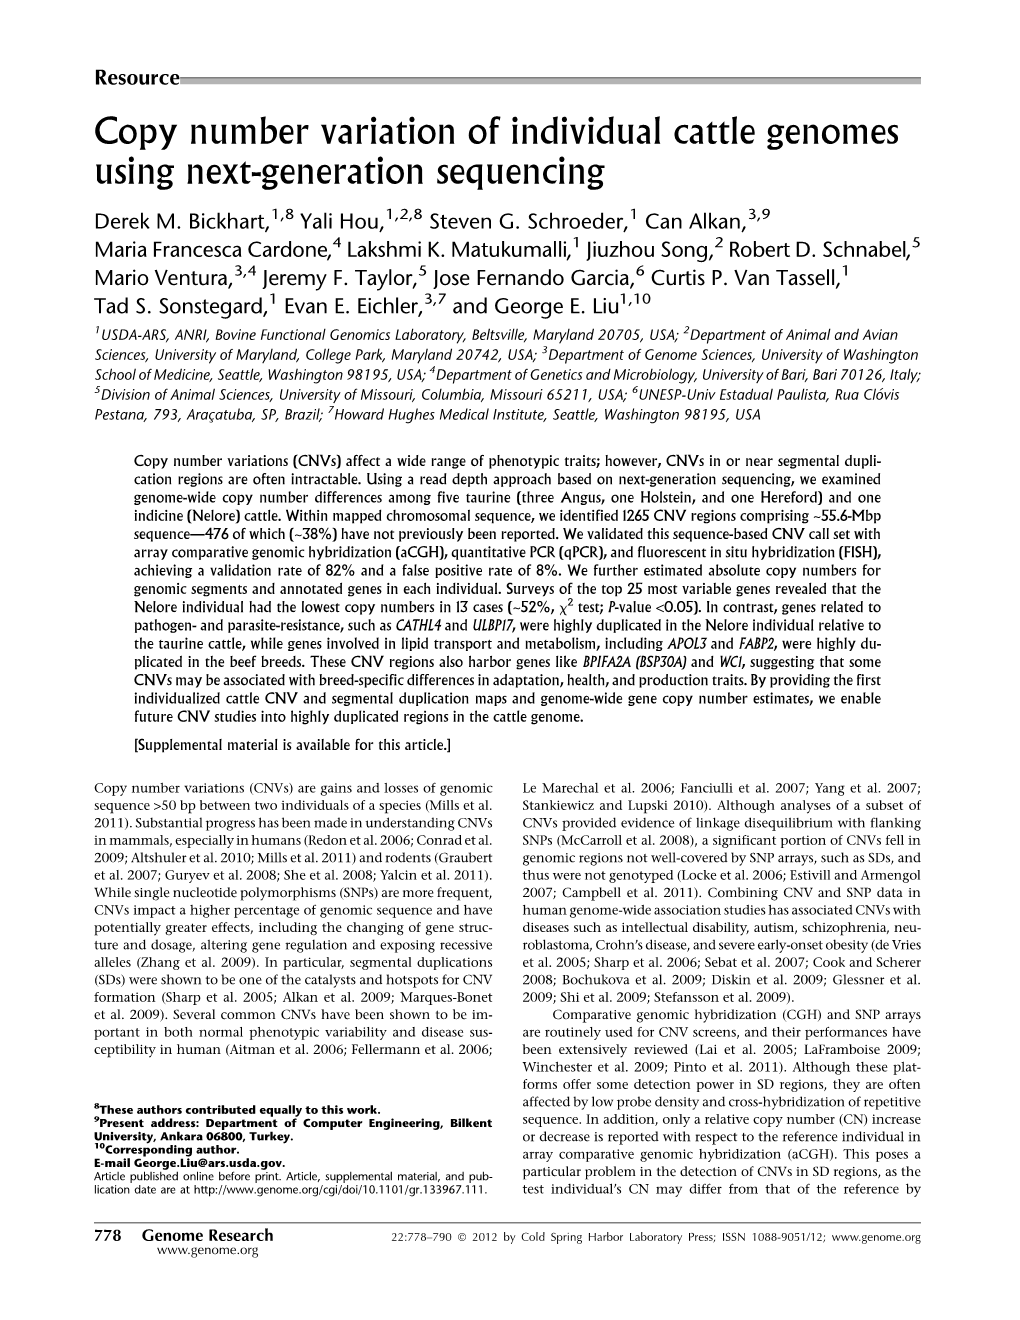 Copy Number Variation of Individual Cattle Genomes Using Next-Generation Sequencing